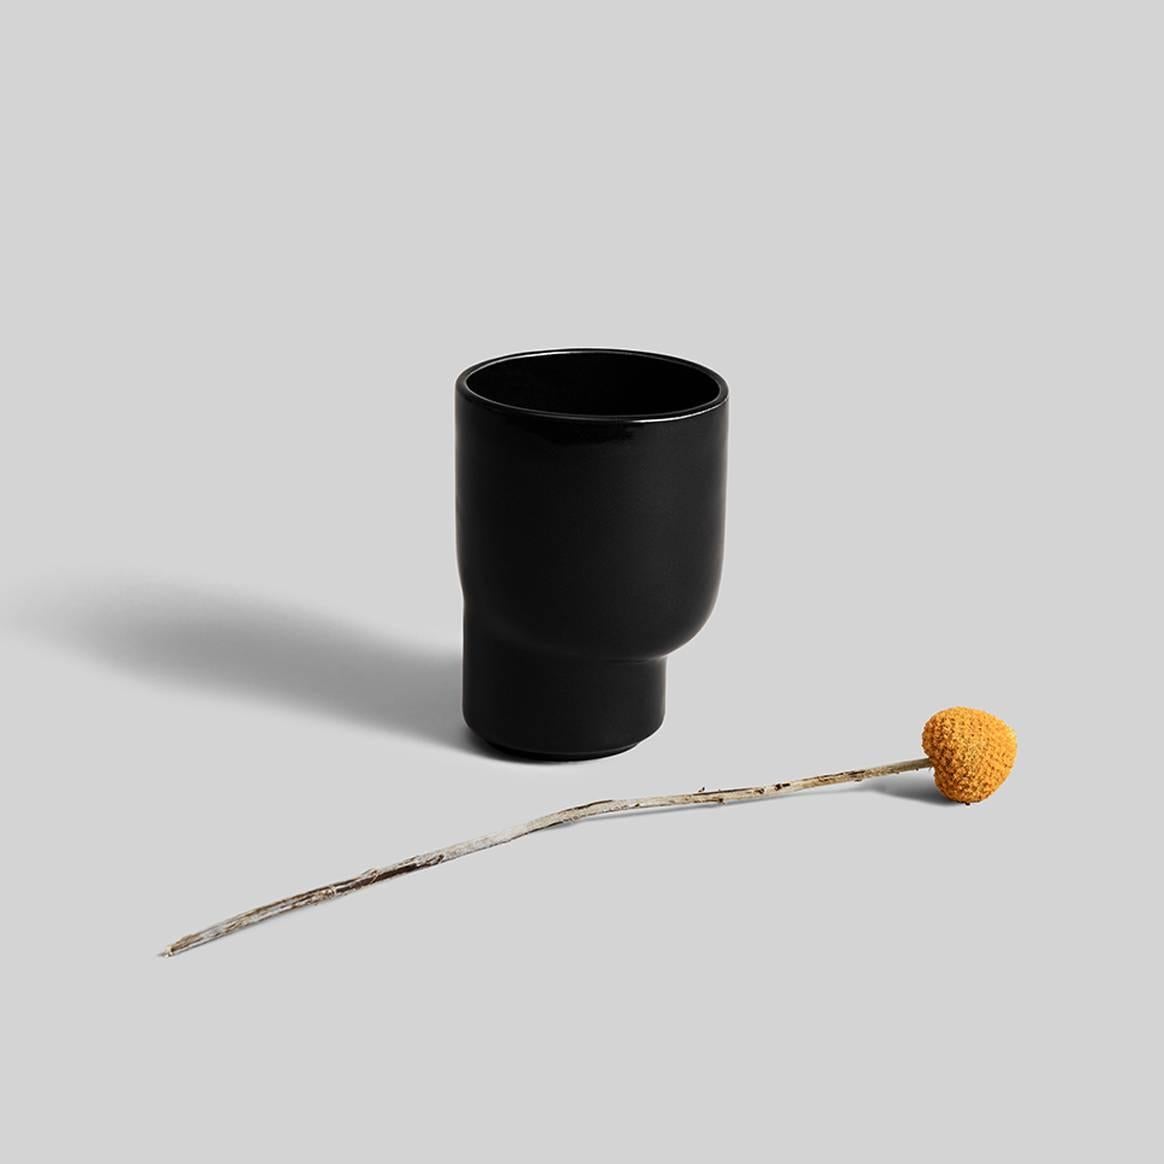 American Glitch Vase / Vessel Set in Contemporary 3D Printed Gloss Black Porcelain For Sale